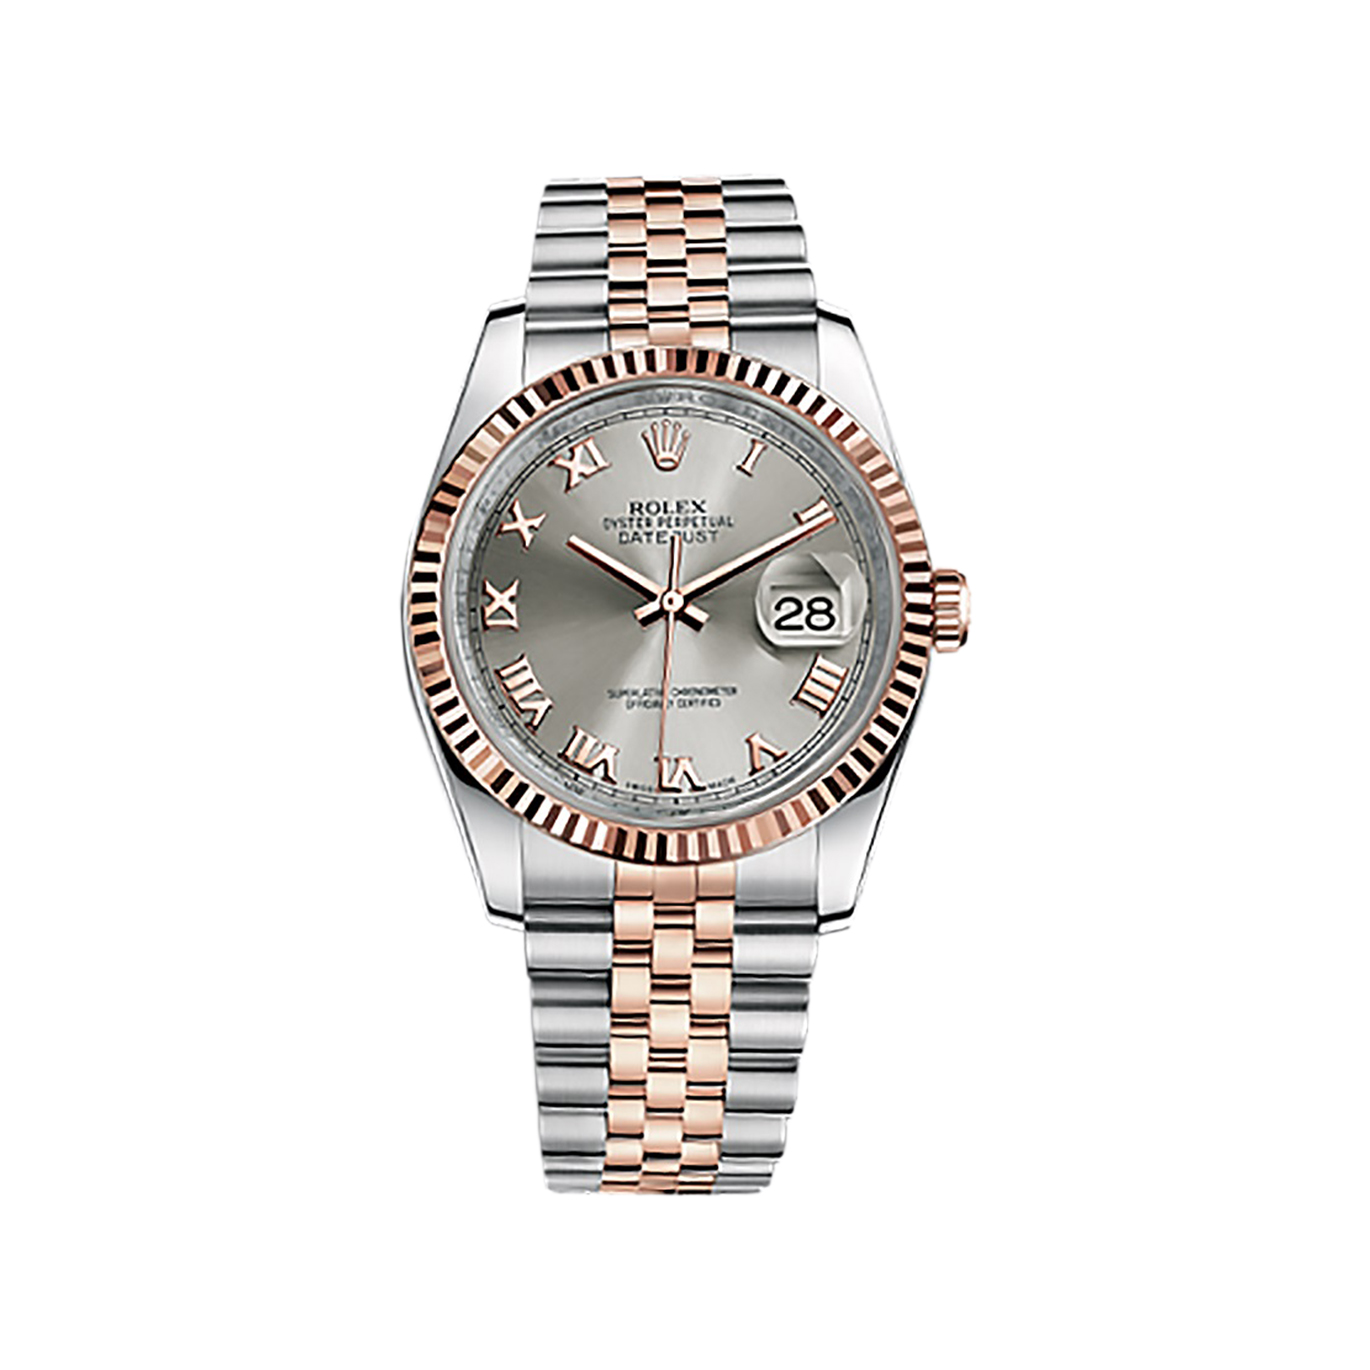 Datejust 36 116231 Rose Gold & Stainless Steel Watch (Steel)